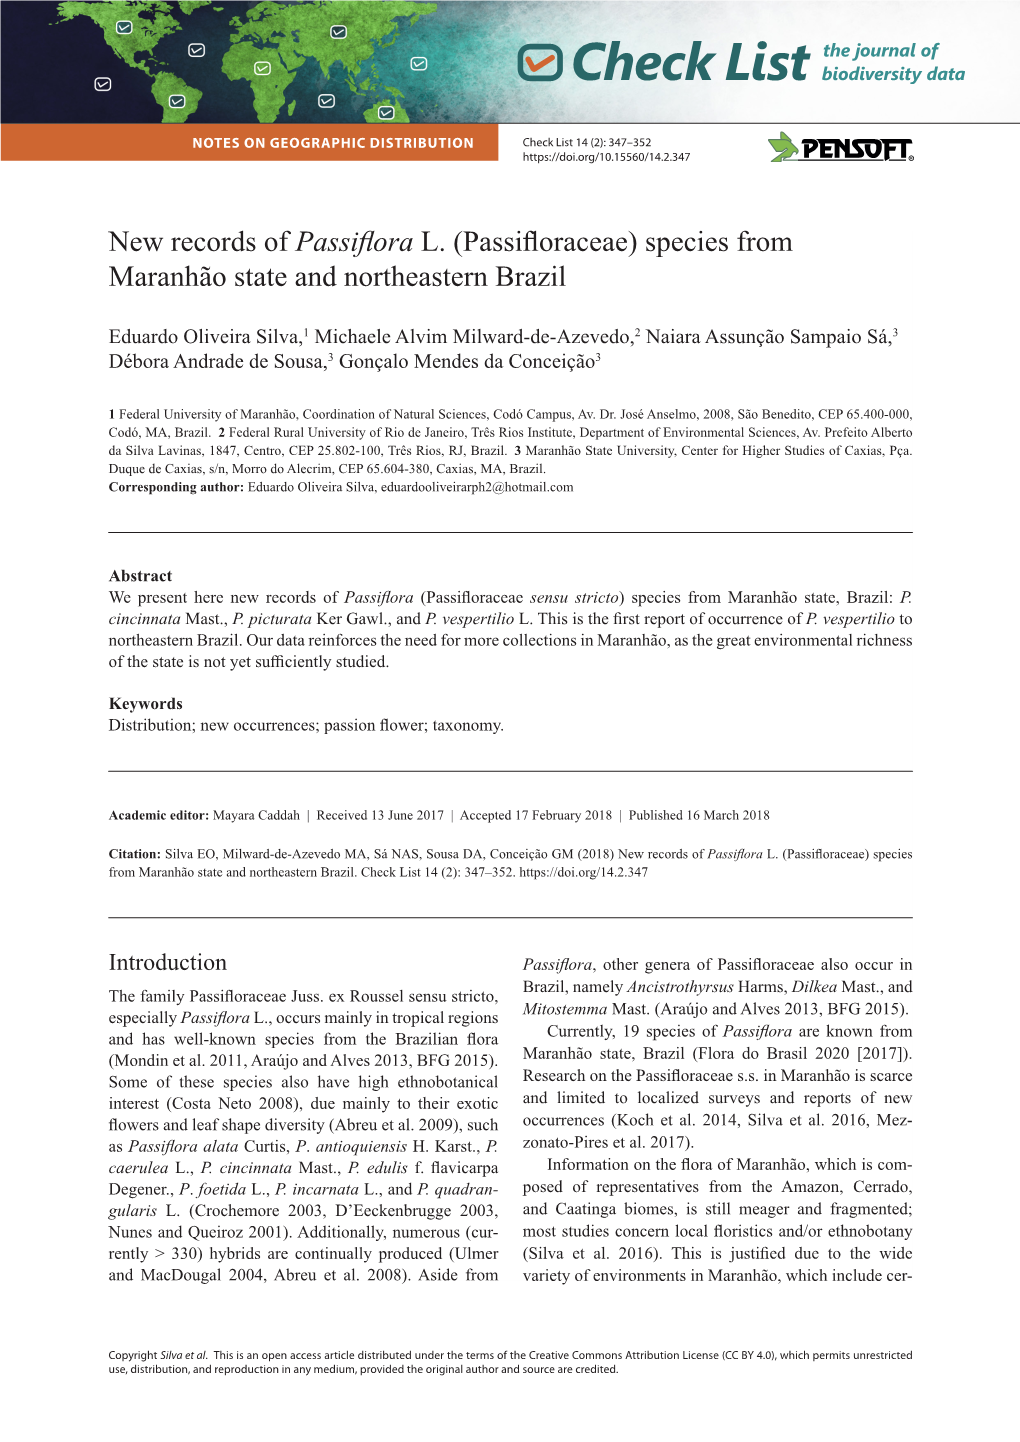 New Records of Passiflora L. (Passifloraceae) Species from Maranhão State and Northeastern Brazil